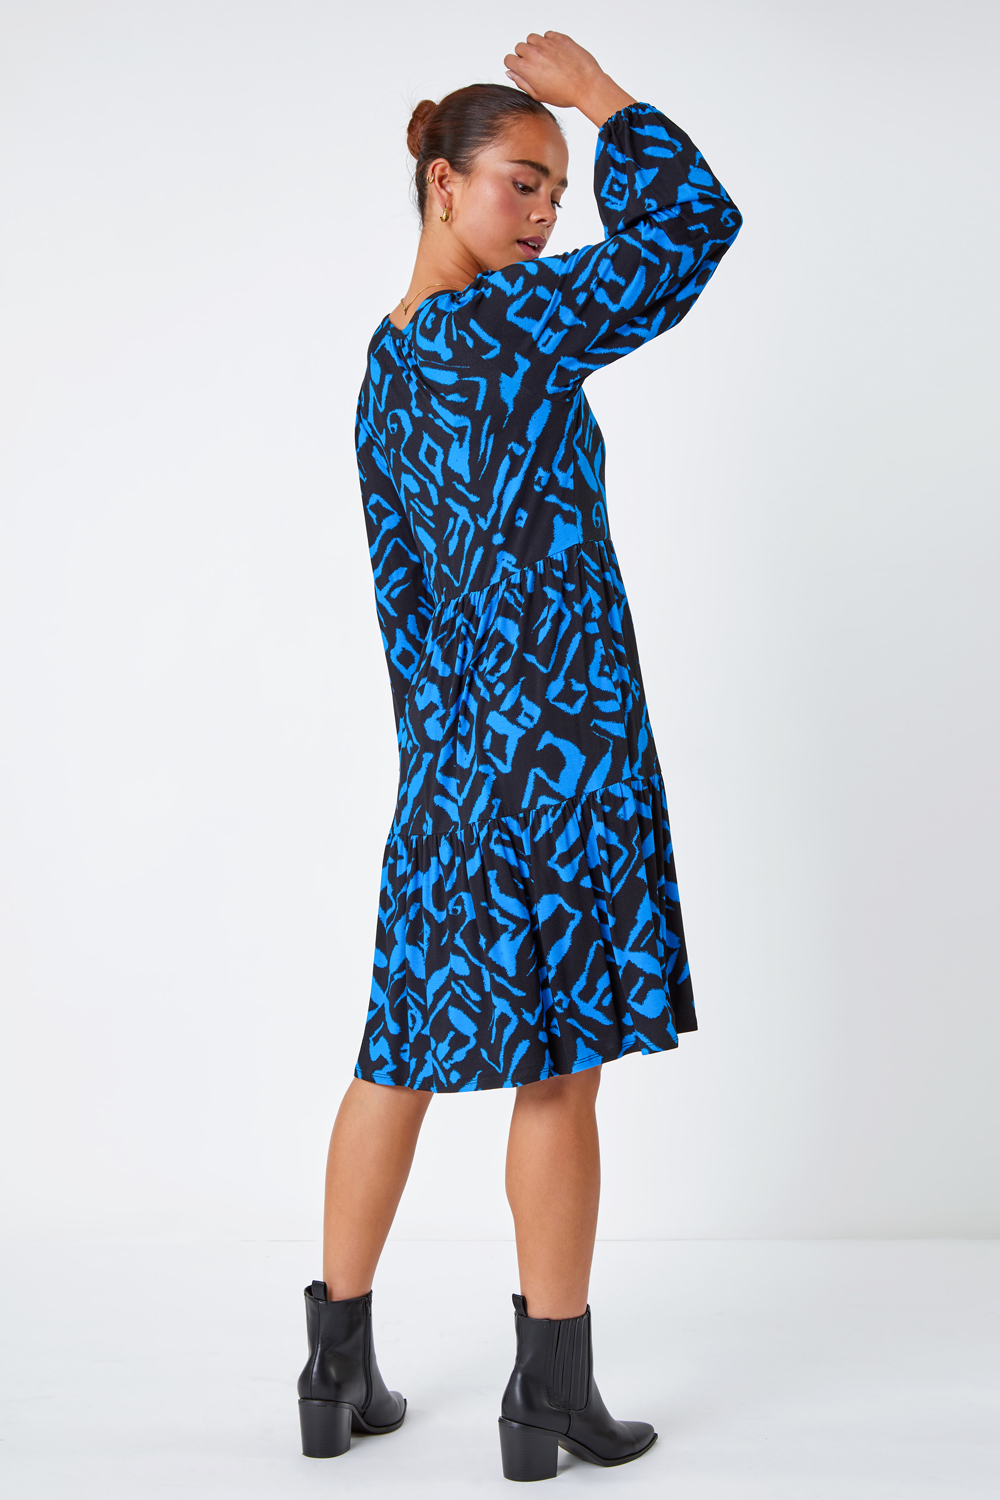 Blue Petite Abstract Print Tiered Stretch Dress, Image 3 of 5